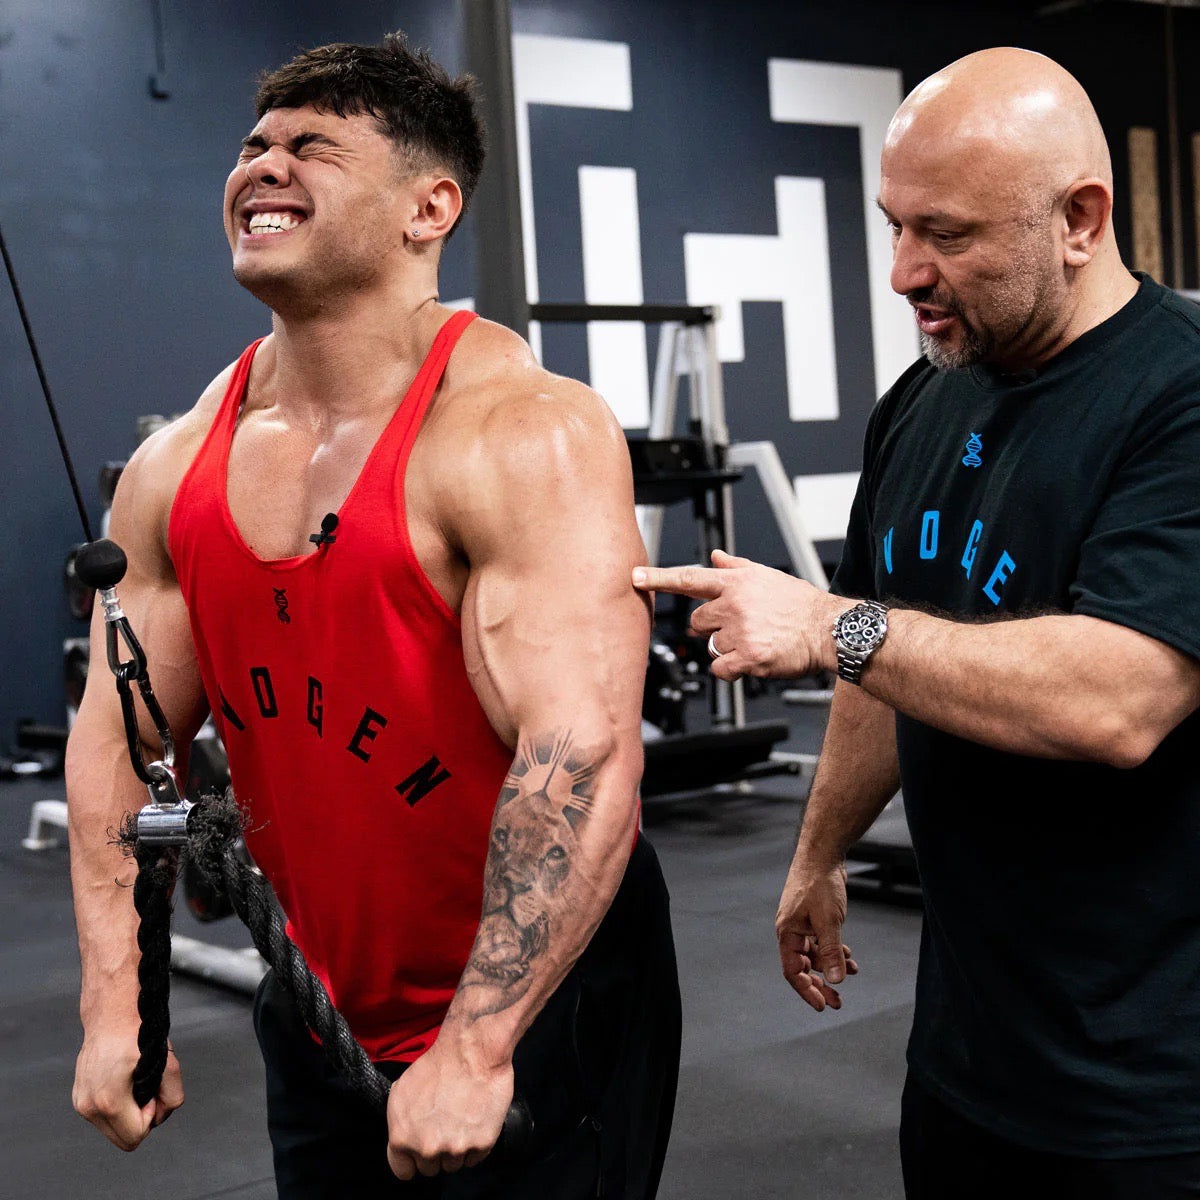 FST7 TIP GET BIG ARMS WITH TRICEPS EXTENSIONS